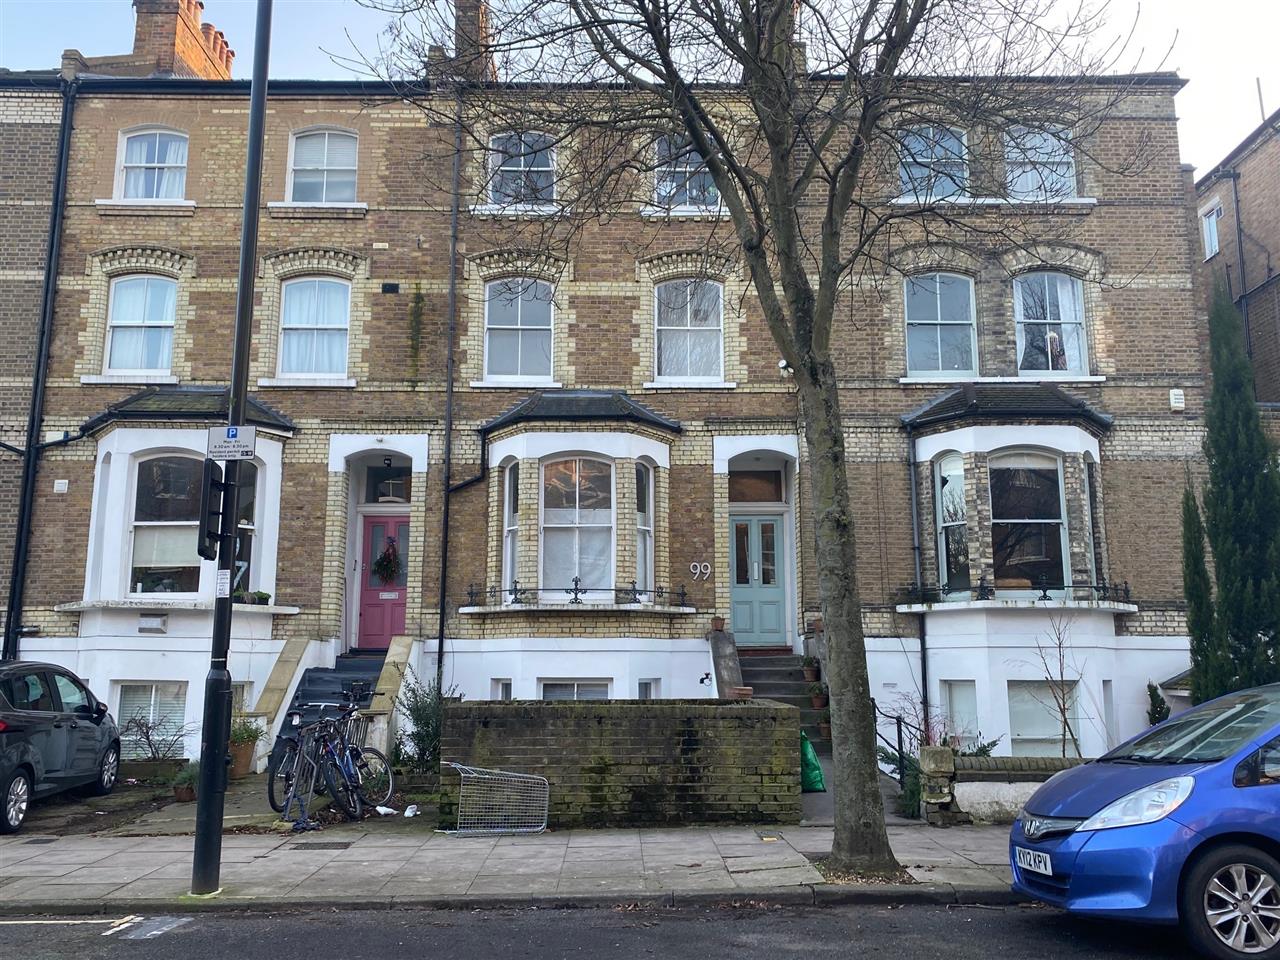 AVAILABLE FROM 19TH MARCH 2022. Located within comfortable walking distance of Tufnell Park underground station (Northern Line) is this well presented FURNISHED first floor converted flat. The accommodation comprises of a double bedroom with recessed fitted wardrobes, modern bathroom, fully ...